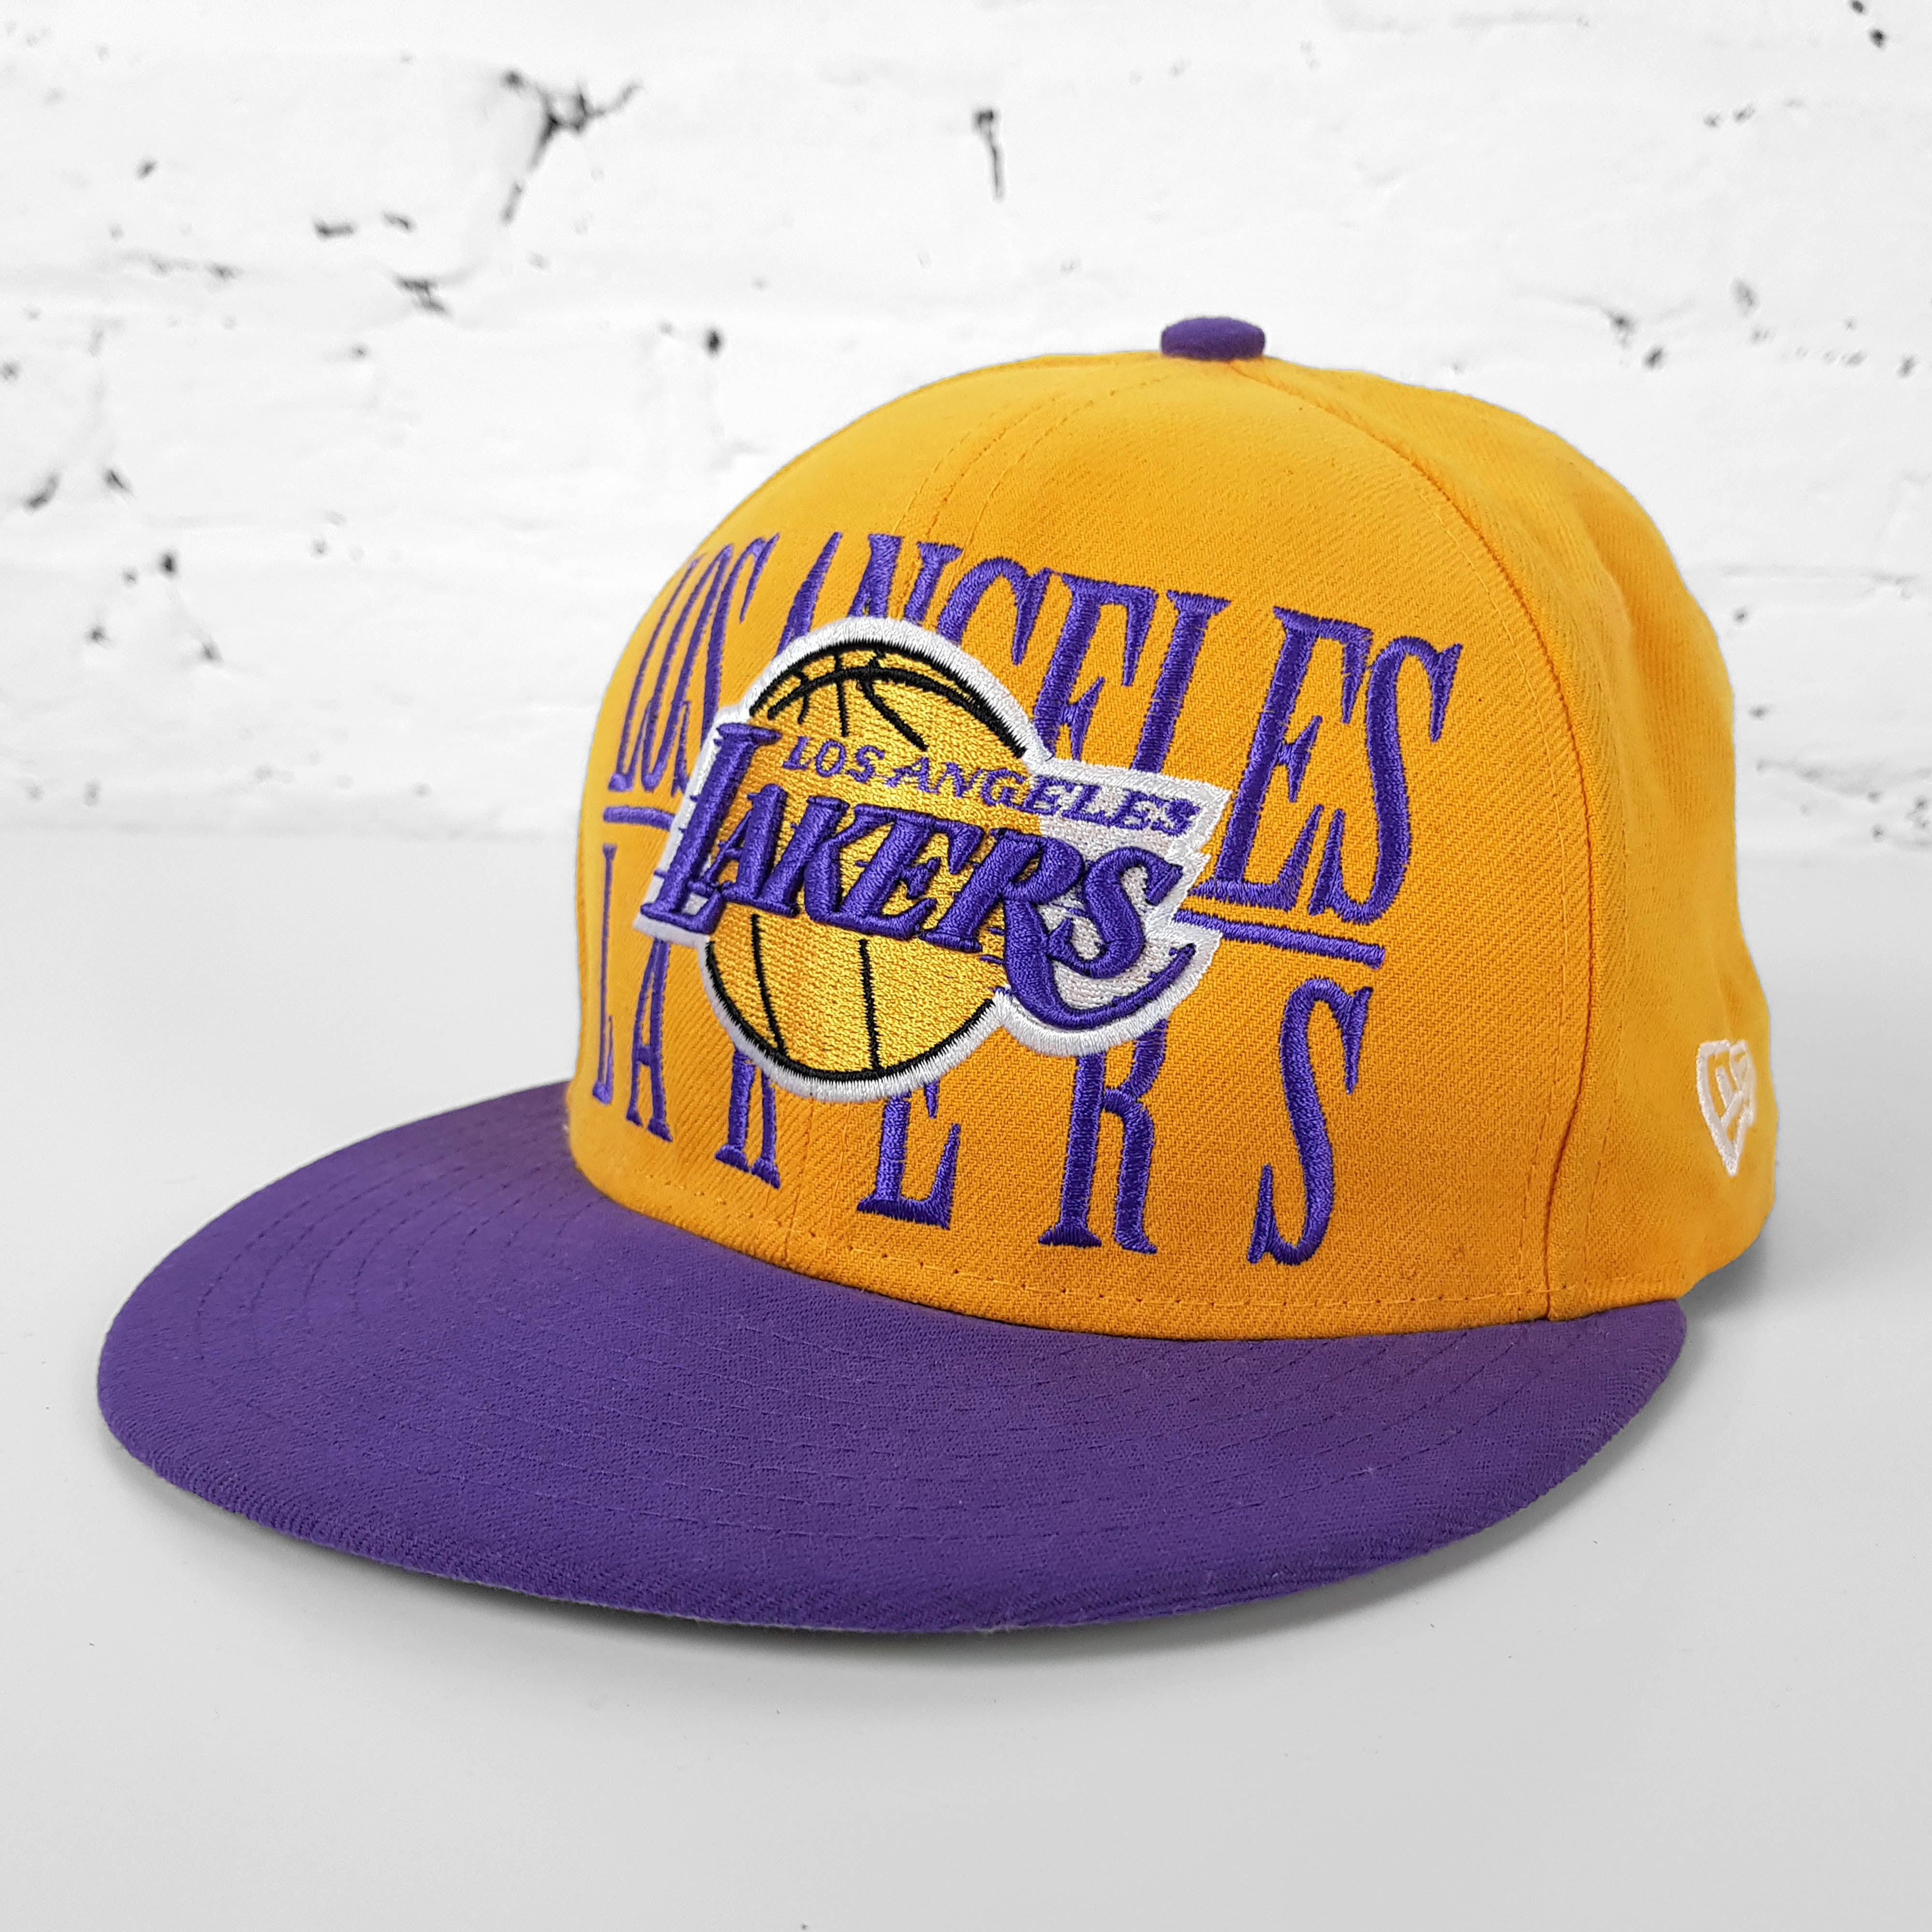 Los Angeles Lakers NBA Intl 006 Mitchell and Ness lilac gray Cap